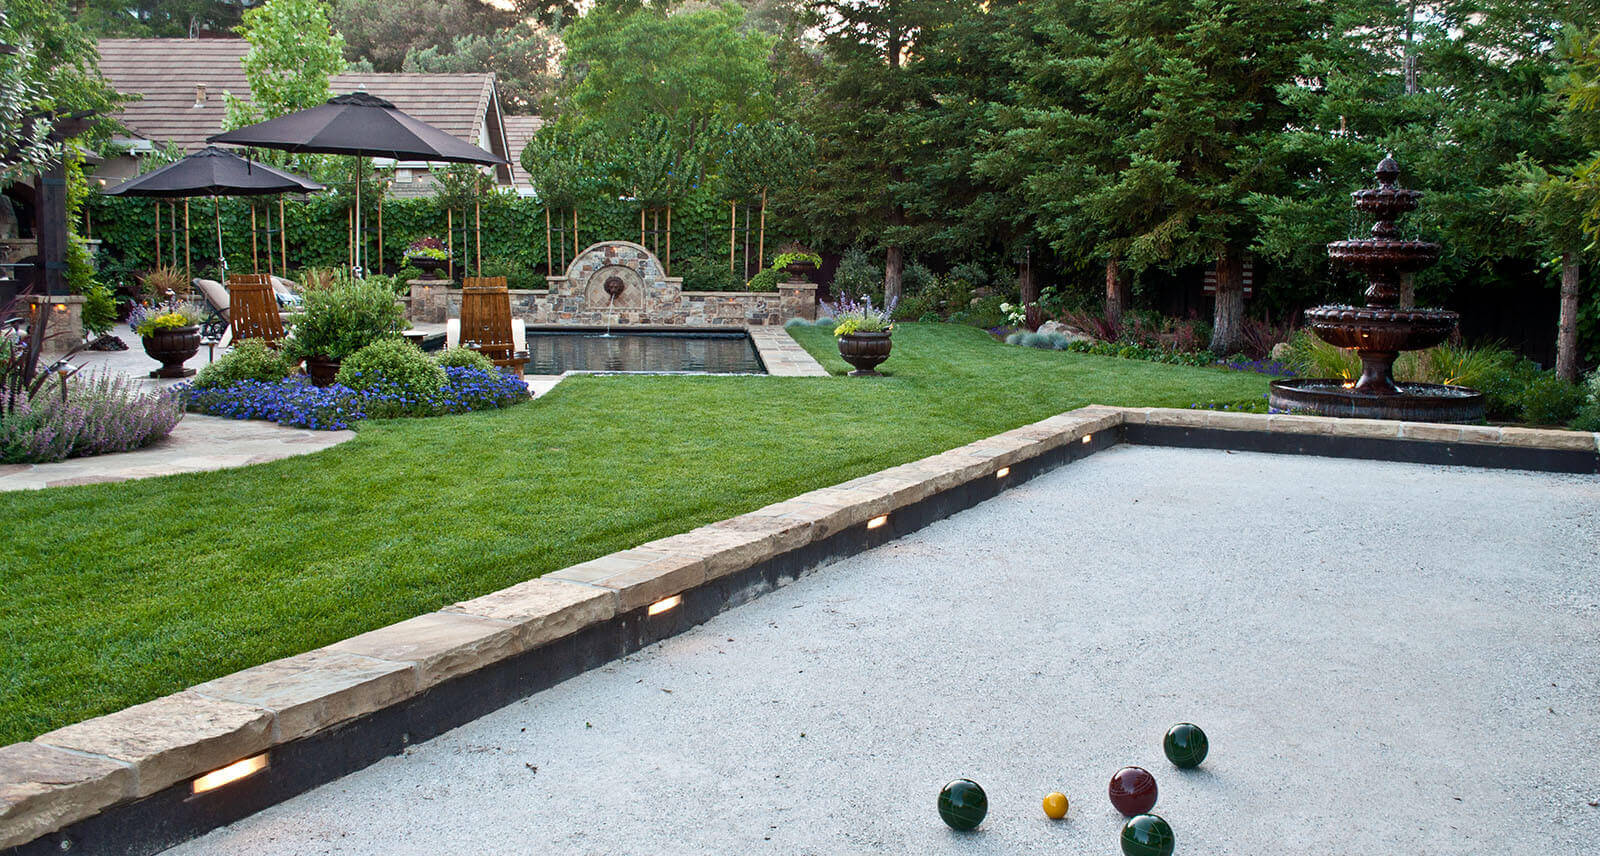 Angled view from stone-lined and lit bachi ball court, looking across lawn to pool and umbrella shaded stone patio